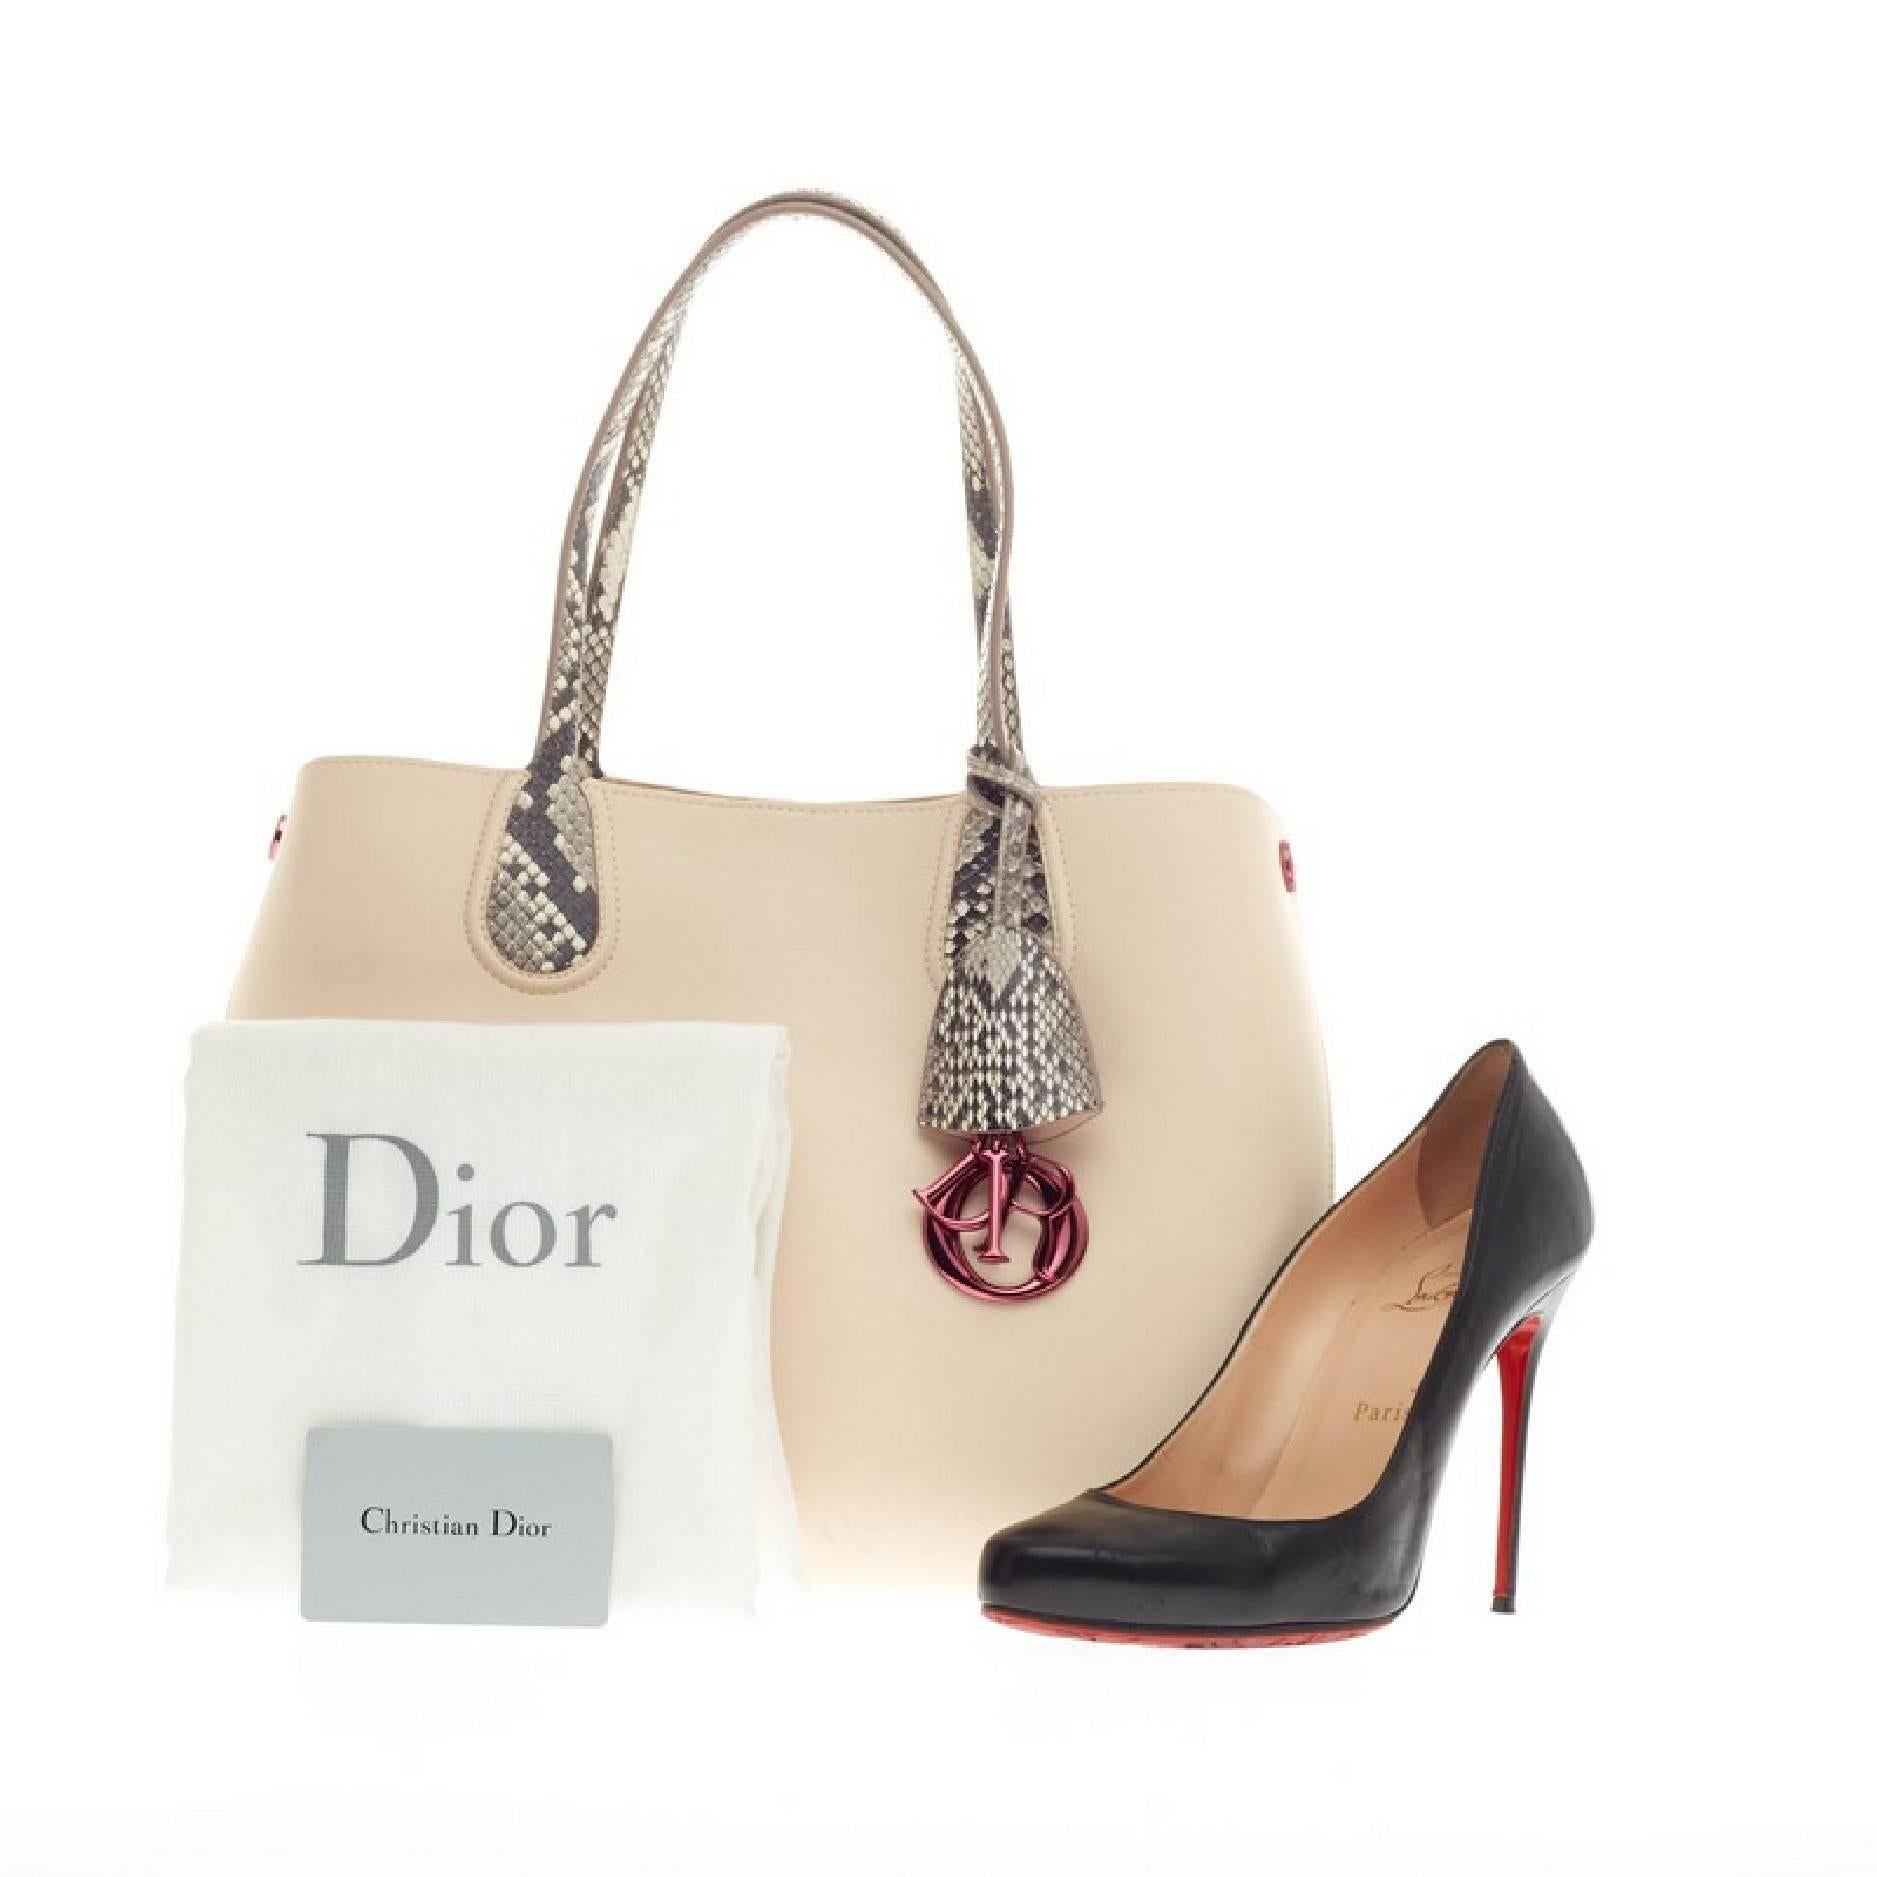 This authentic Christian Dior Addict Shopping Tote Leather and Python Small presented in the brand's Cruise 2014 Collection is luxuriously sleek and modern in design perfect for work or everyday excursions. Crafted in light pink supple calfskin